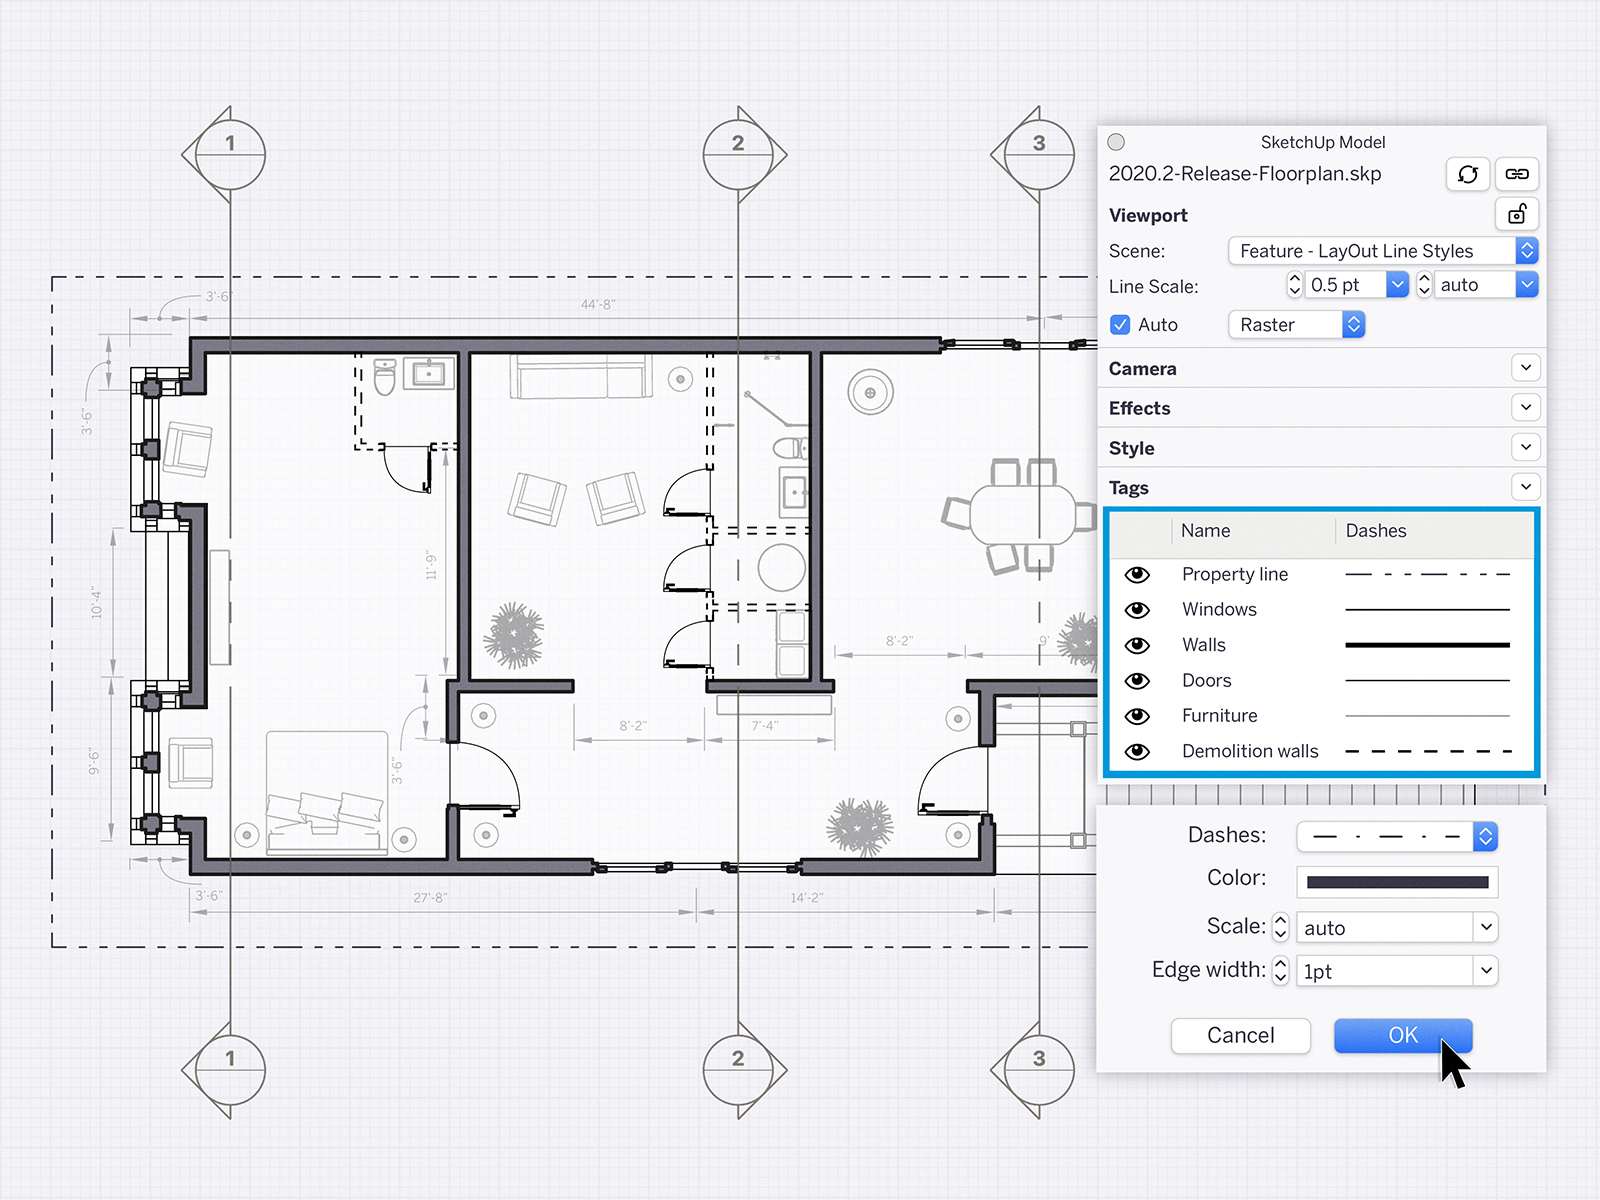 SketchUp Software - Turn your 3D models into detailed documents. With LayOut, you can customize your views, add details and dimensions, and create title blocks. The best part: when your 3D model updates, so do your drawings.